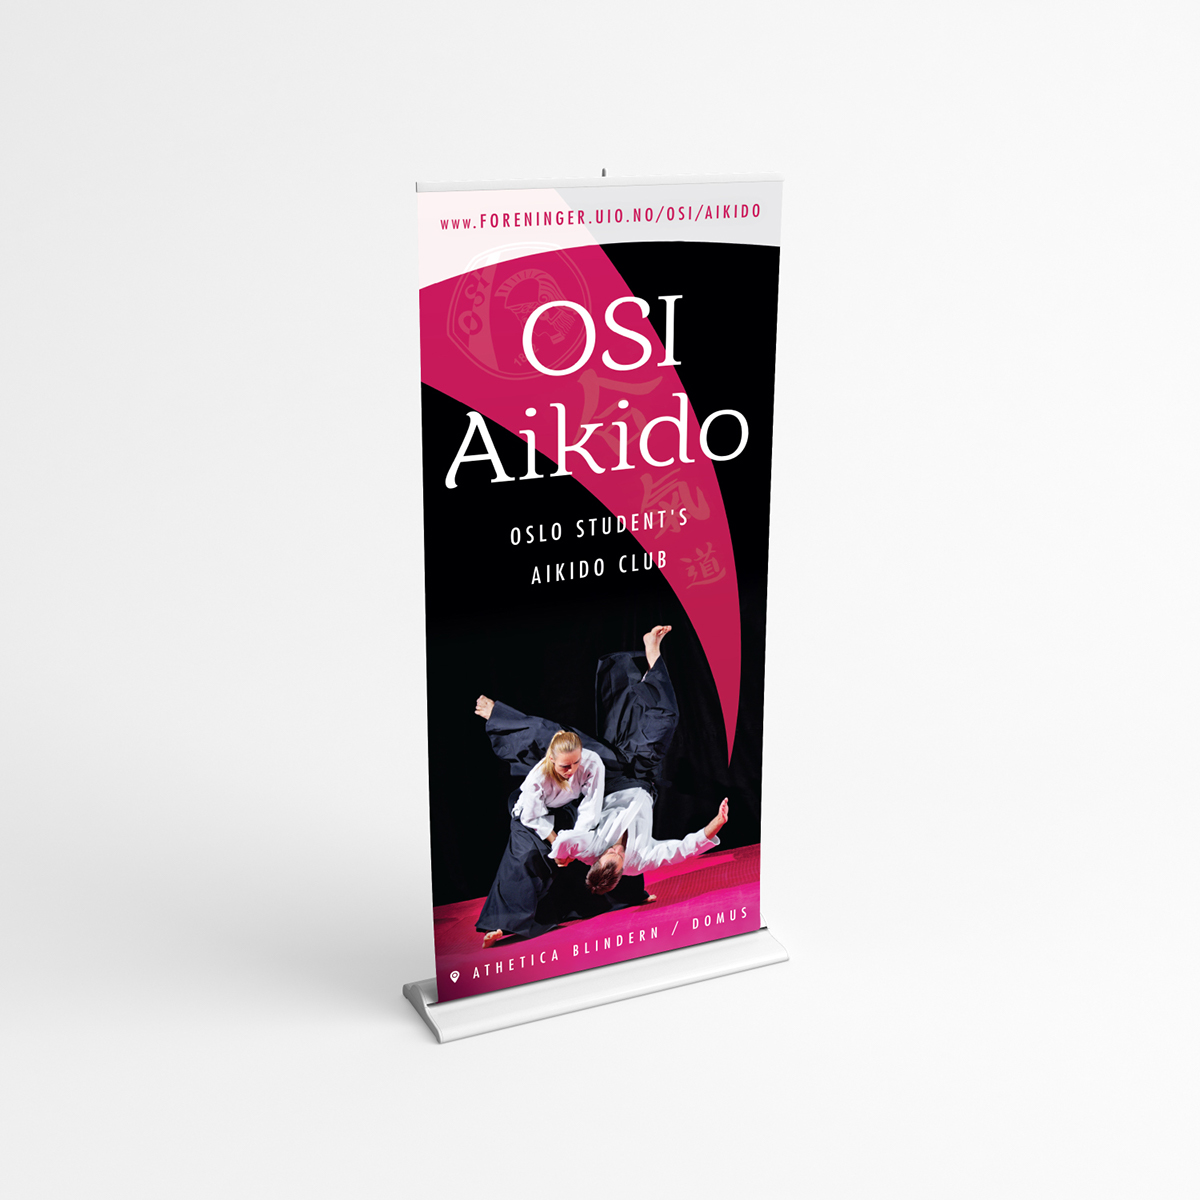 aikido poster flyer business card